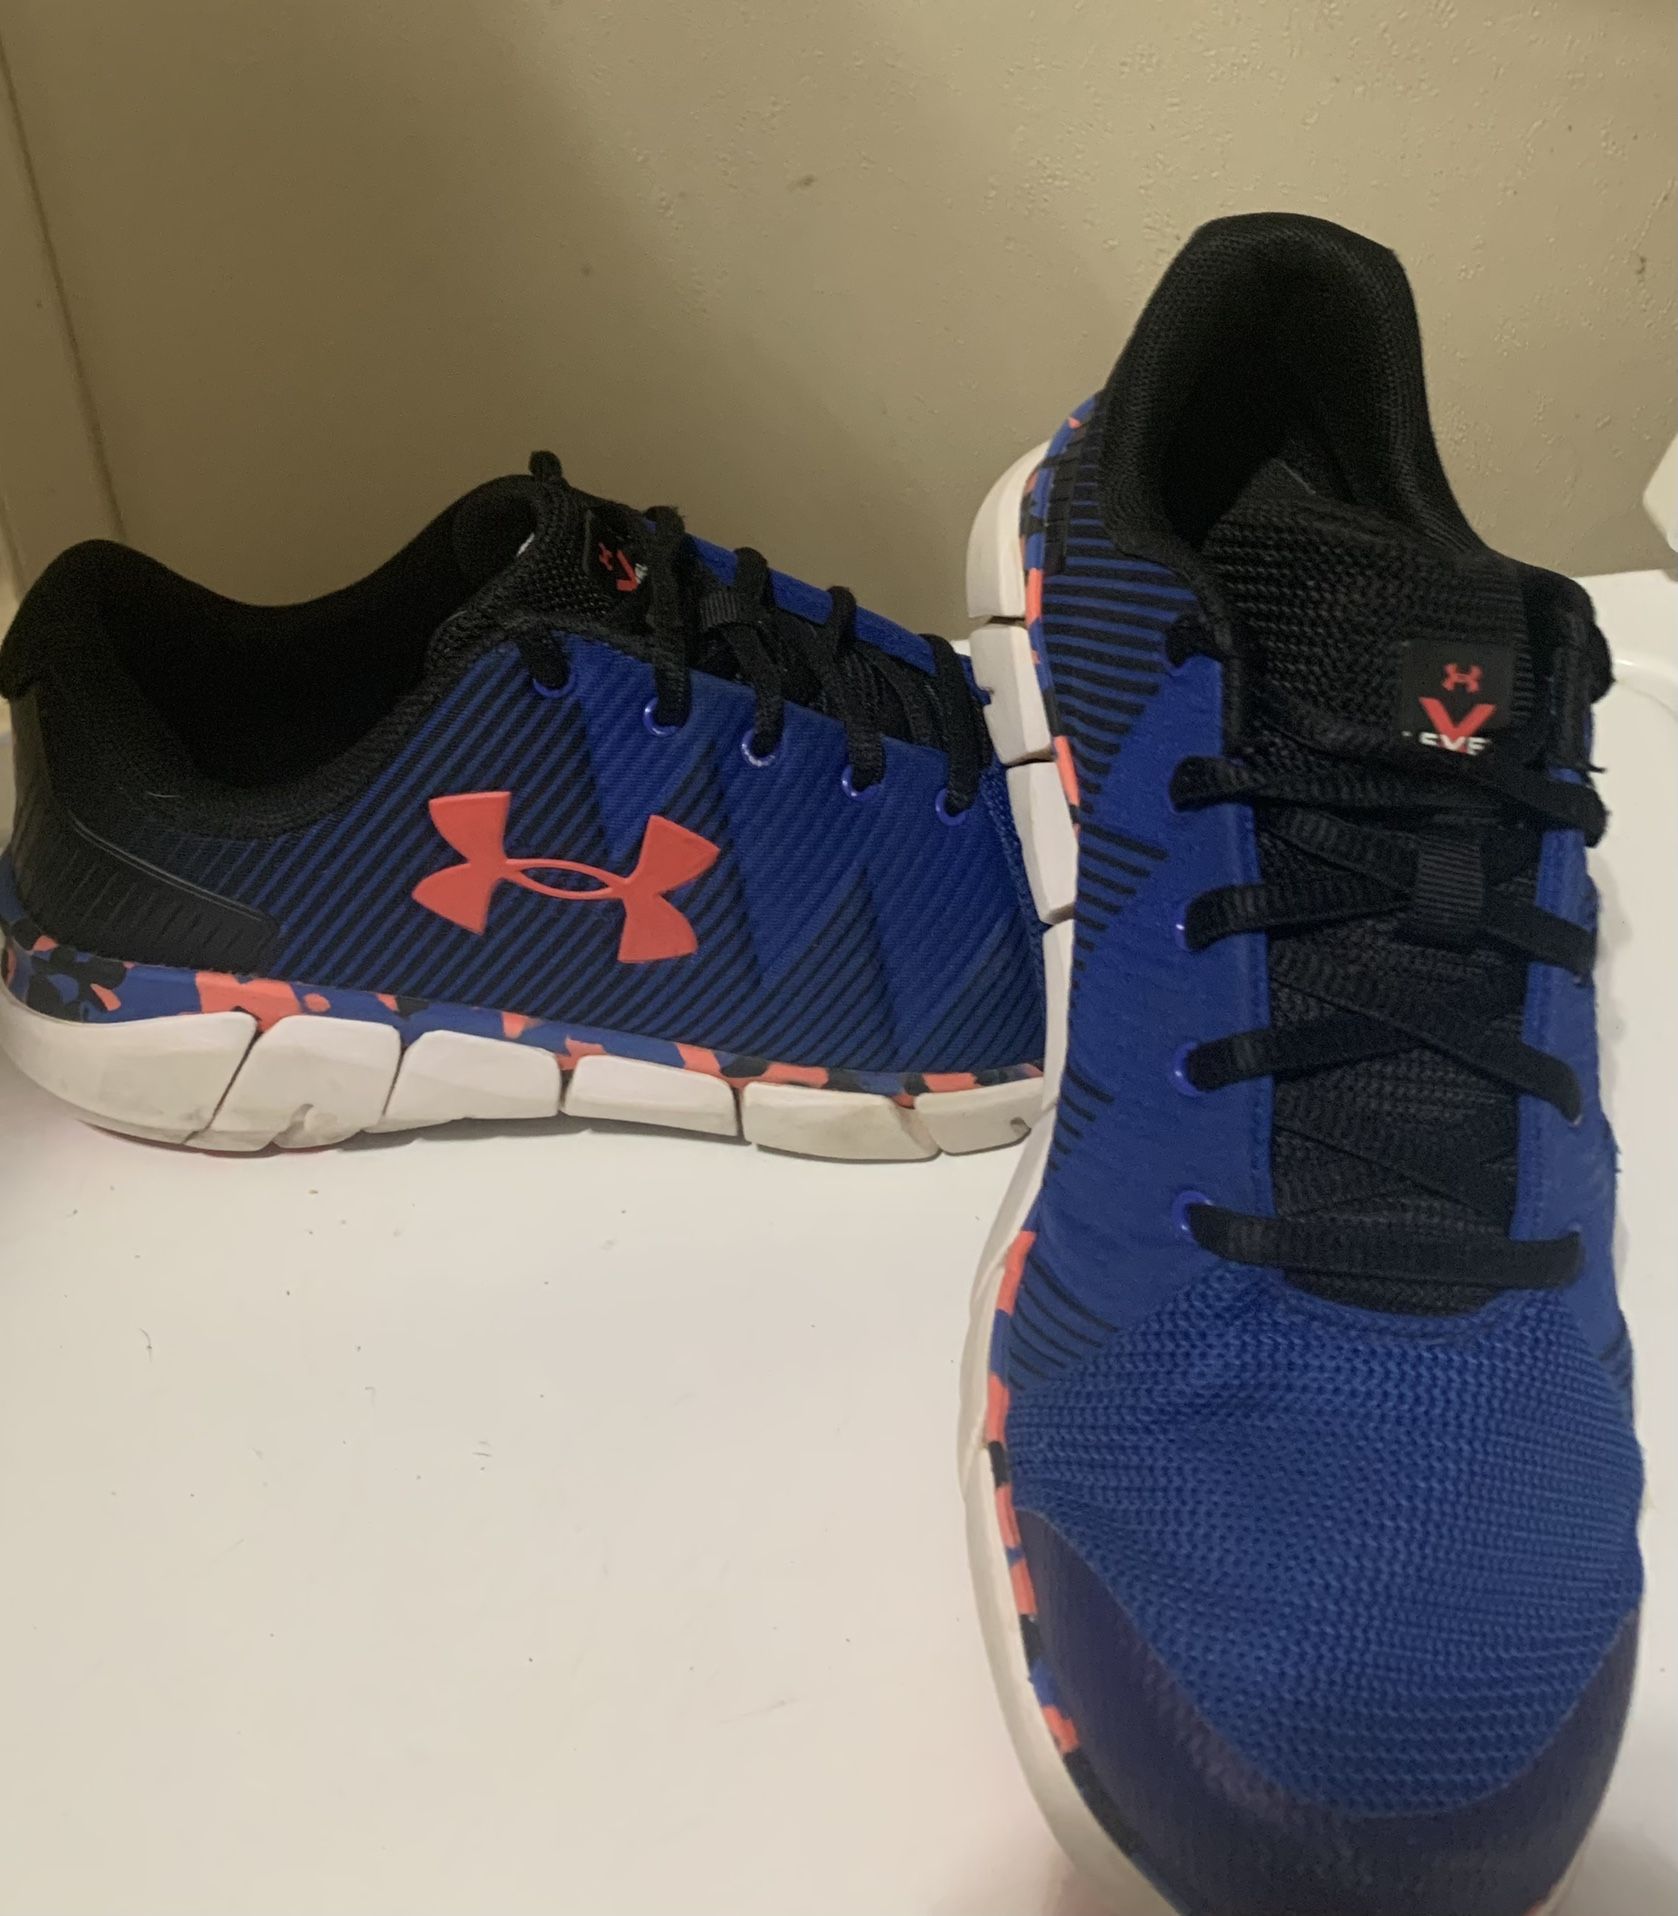 Under Armour Women’s Sneakers